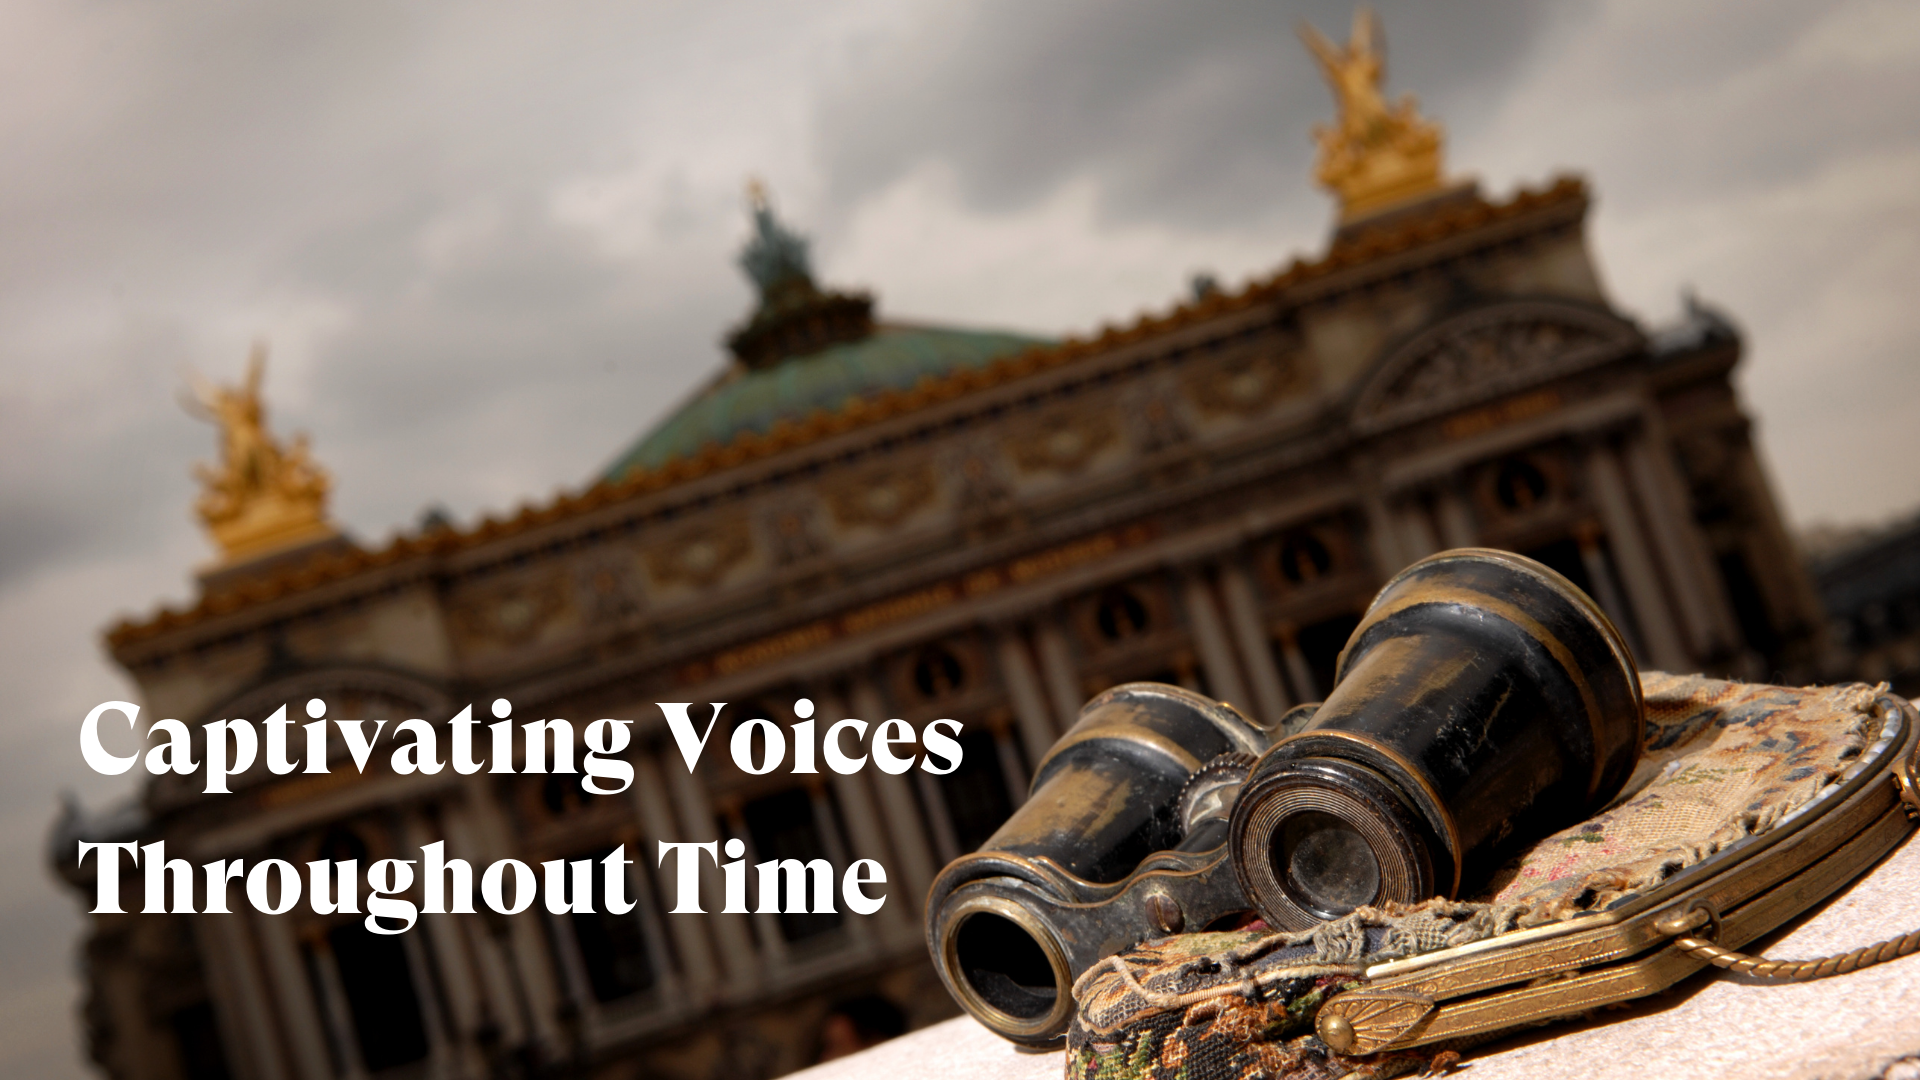 Captivating Voices Throughout Time